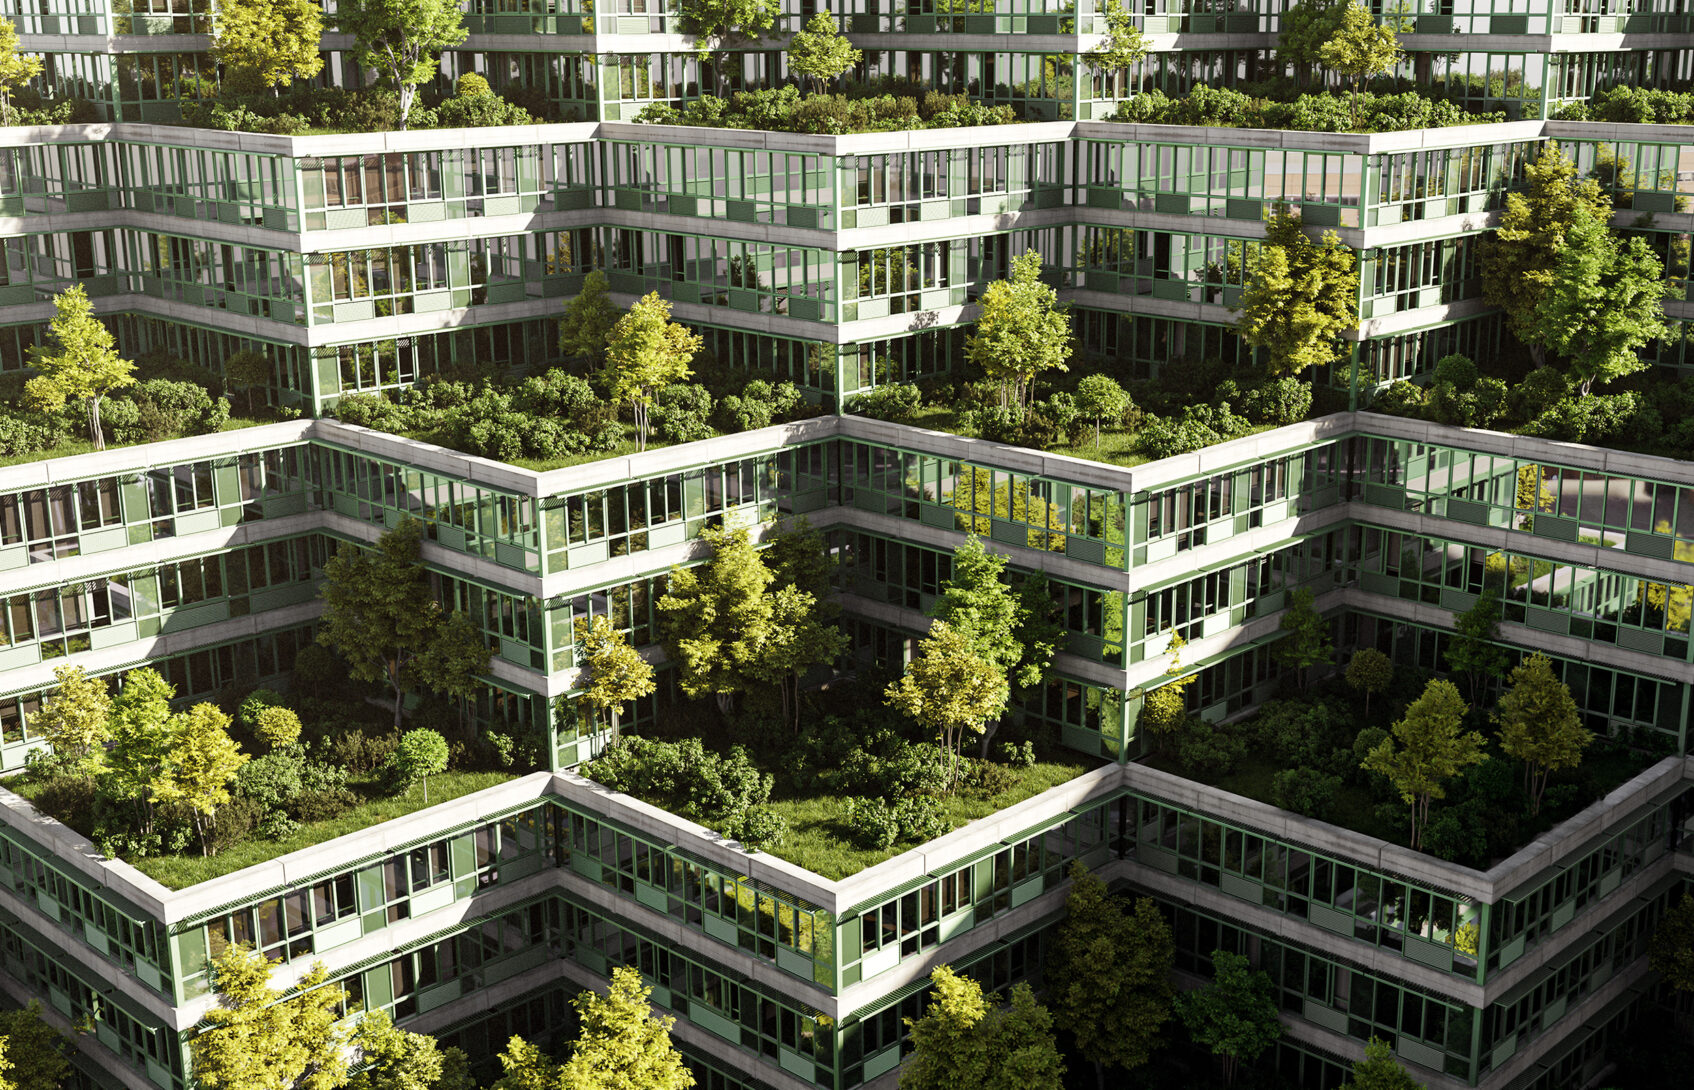 Housing complex with roof gardens.